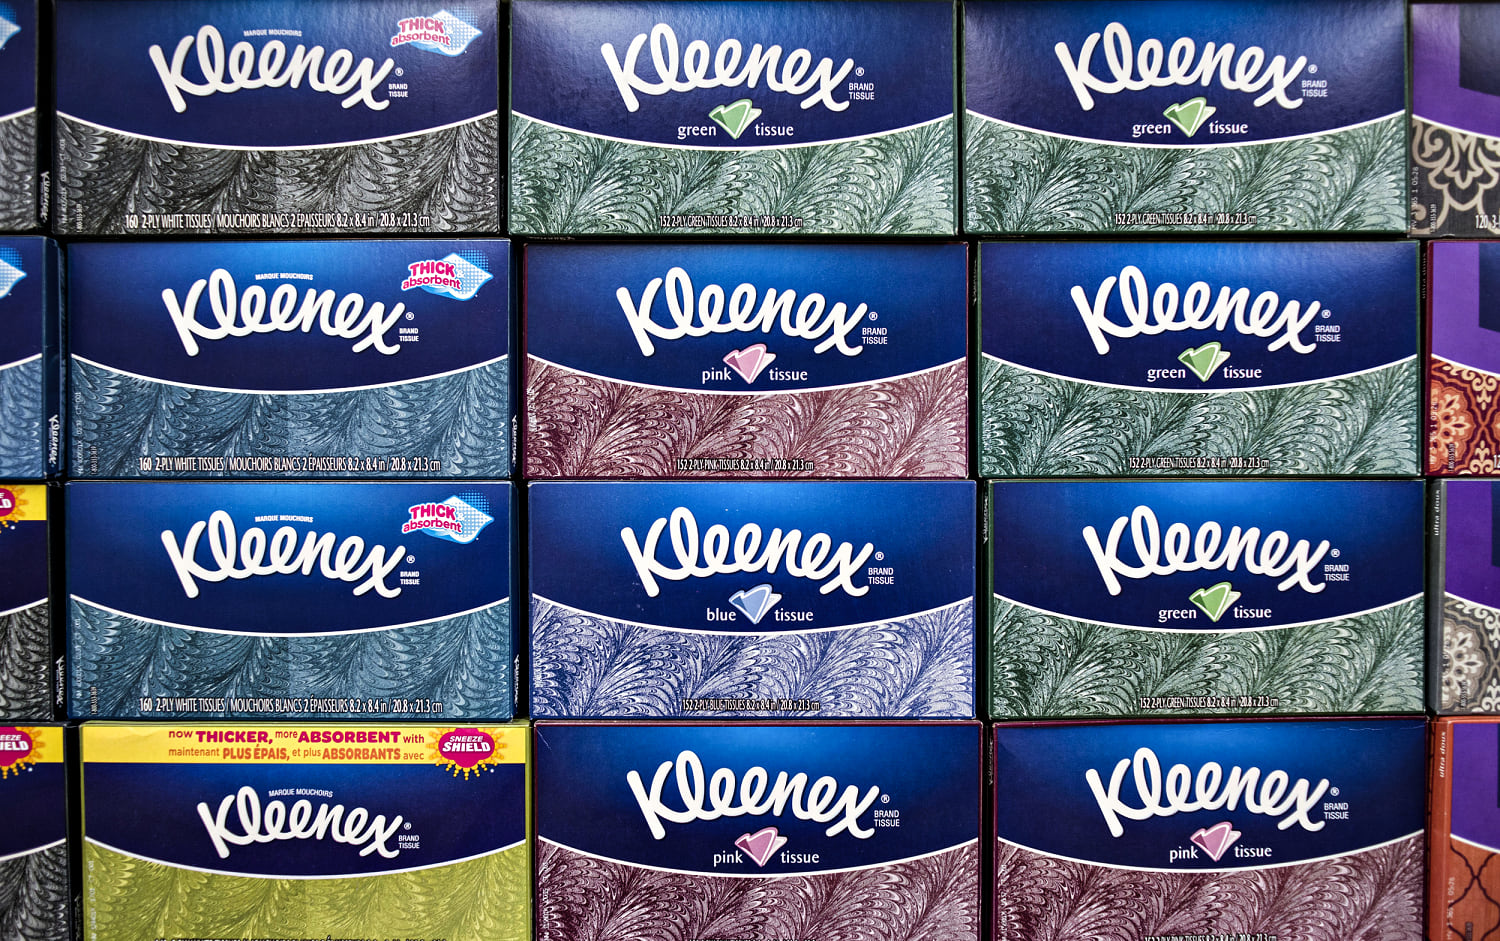 Lawsuit accuses Kleenex maker Kimberly-Clark of polluting a town with PFAS chemicals